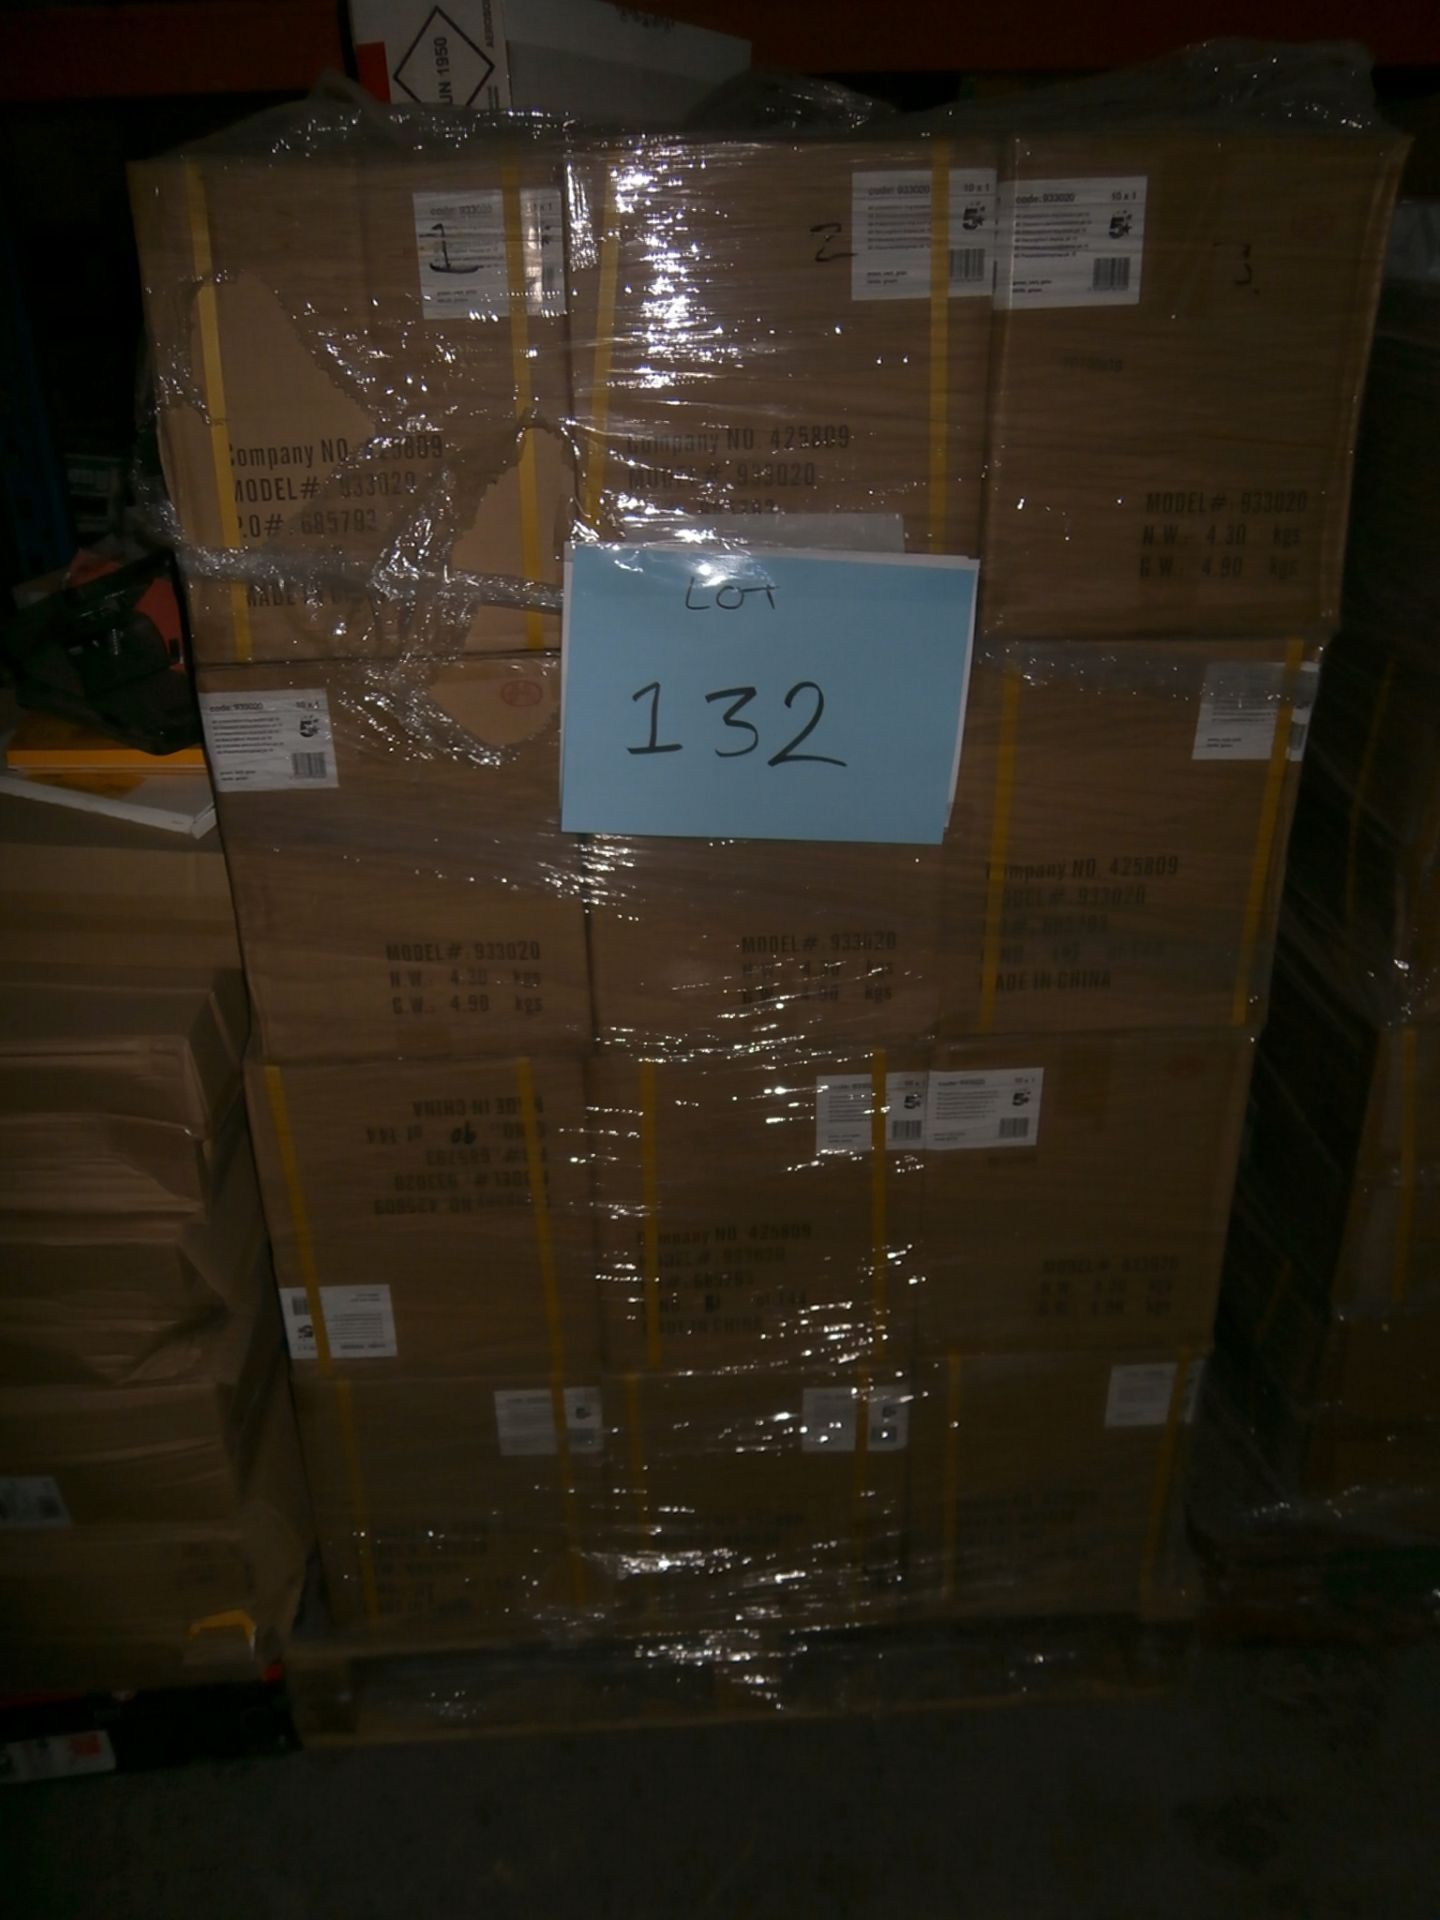 1 x Pallet of 5 Star 4D Presentation Ringbinders - Product Code 933020 (Approximately 48 Boxes of 10